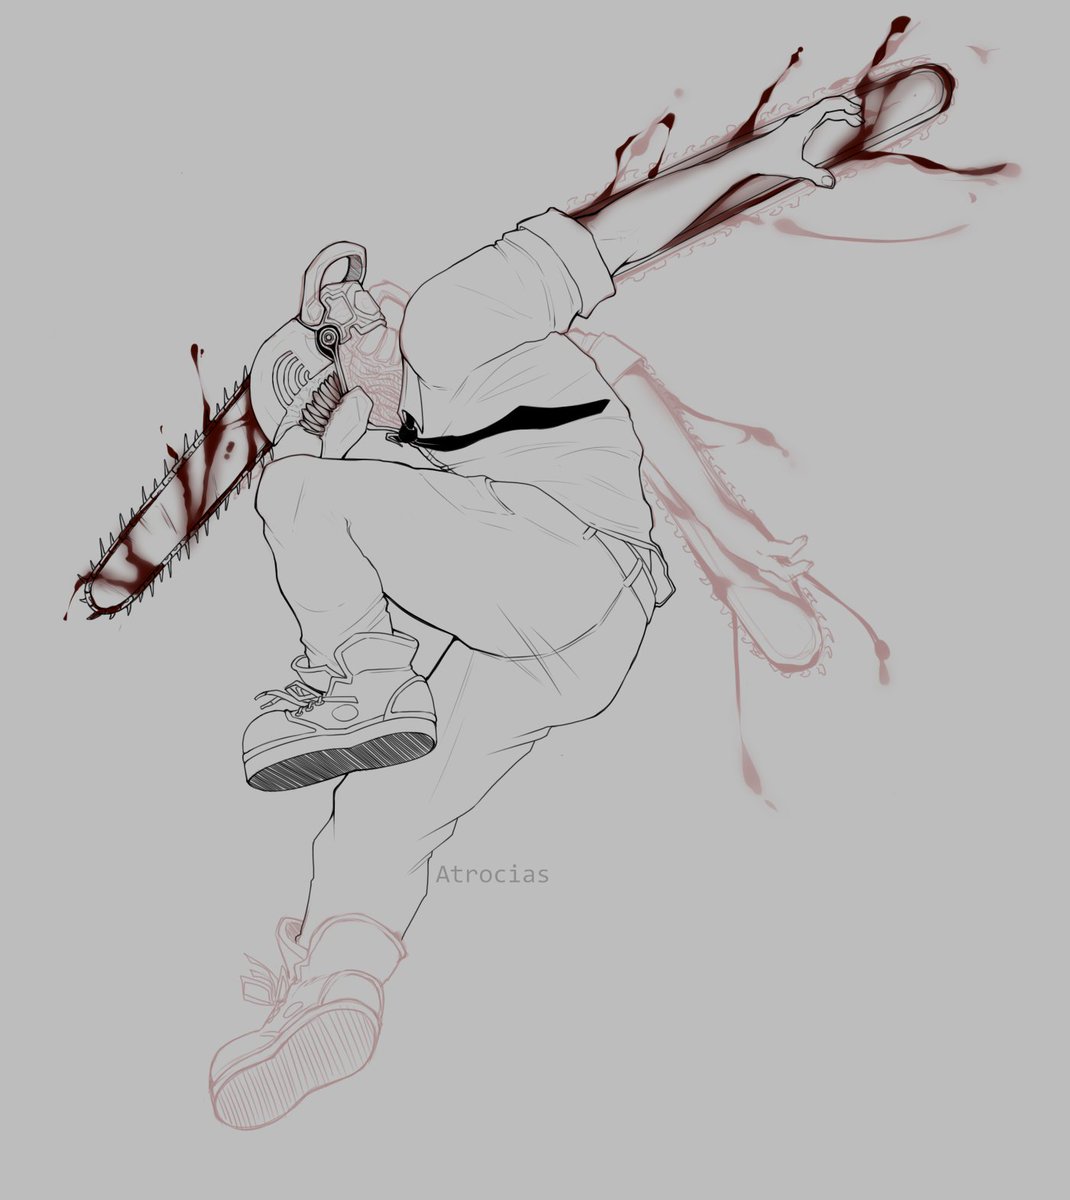 a little WIP- chainsaw man for a friend for a favor they did me! Still a long way to go but proud so far